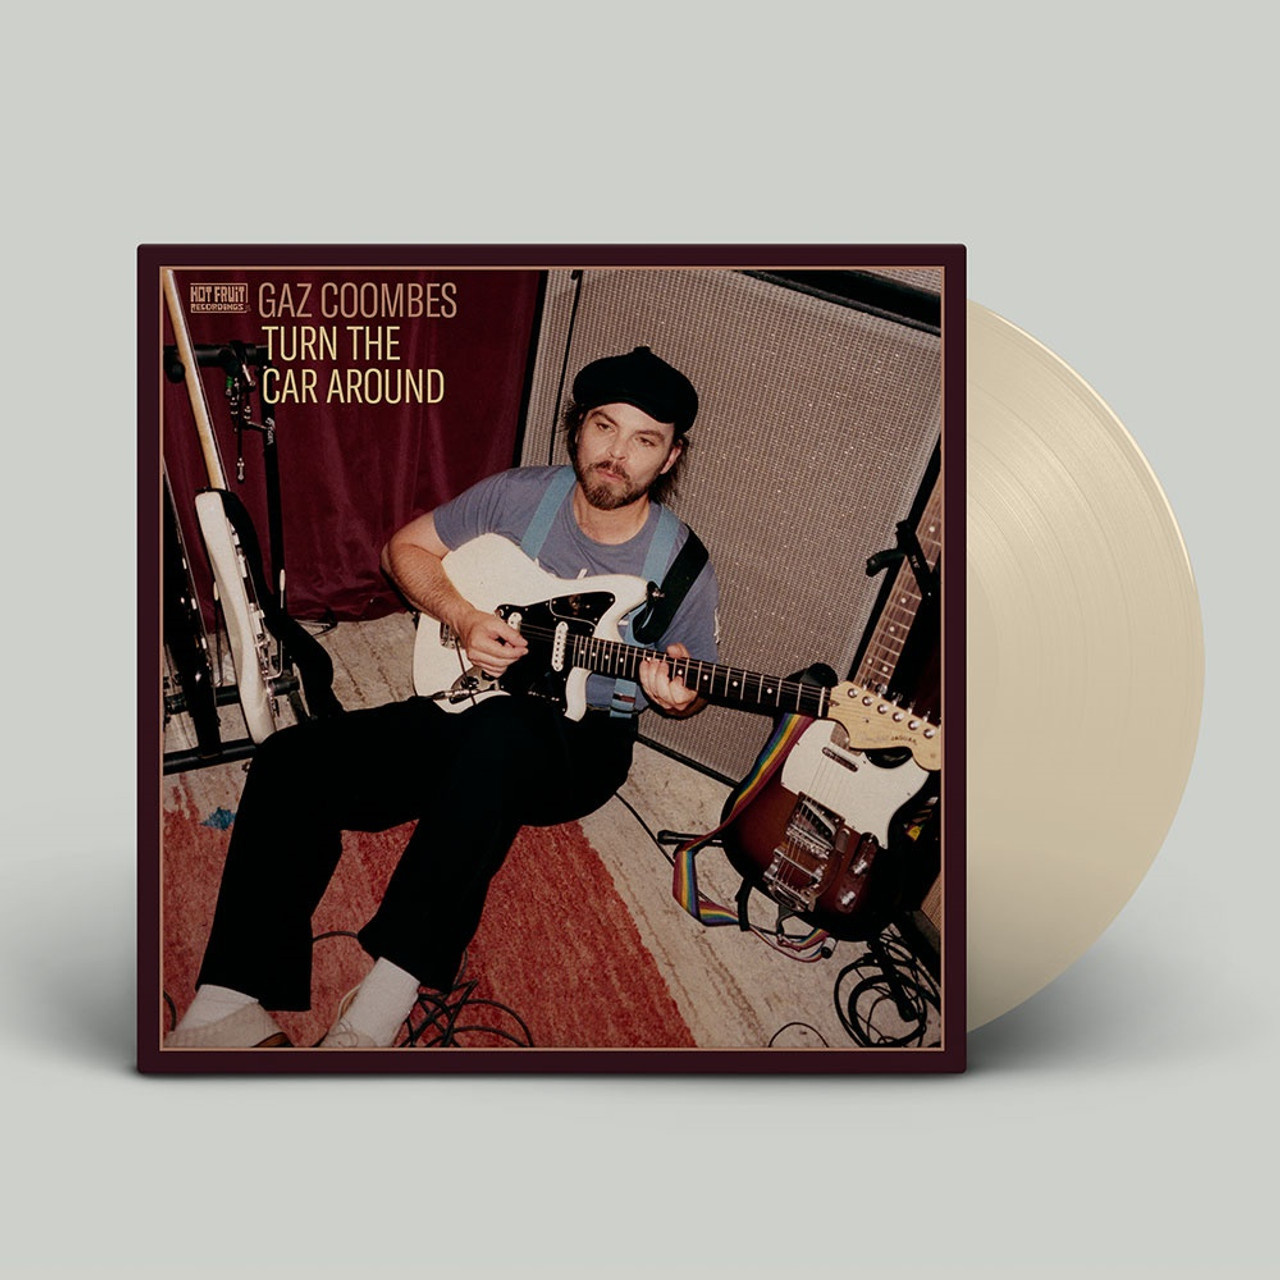 Limited Opaque White Vinyl